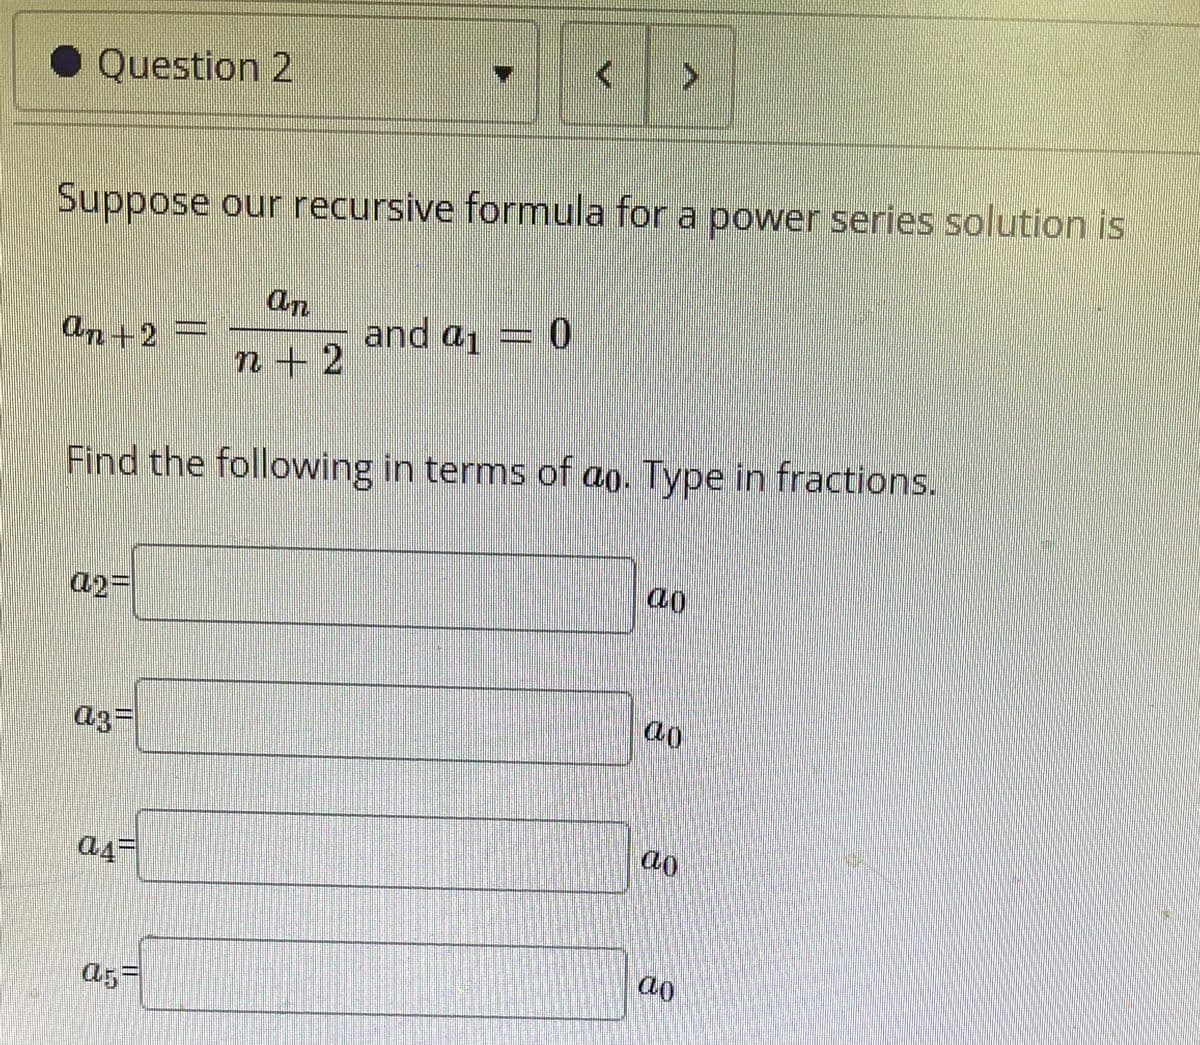 • Question 2
Suppose our recursive formula for a power series solution is
On
and a1
An+2
n+2
Find the following in terms of ao. Type in fractions.
a2=
ao
a3=
ao
a5=
